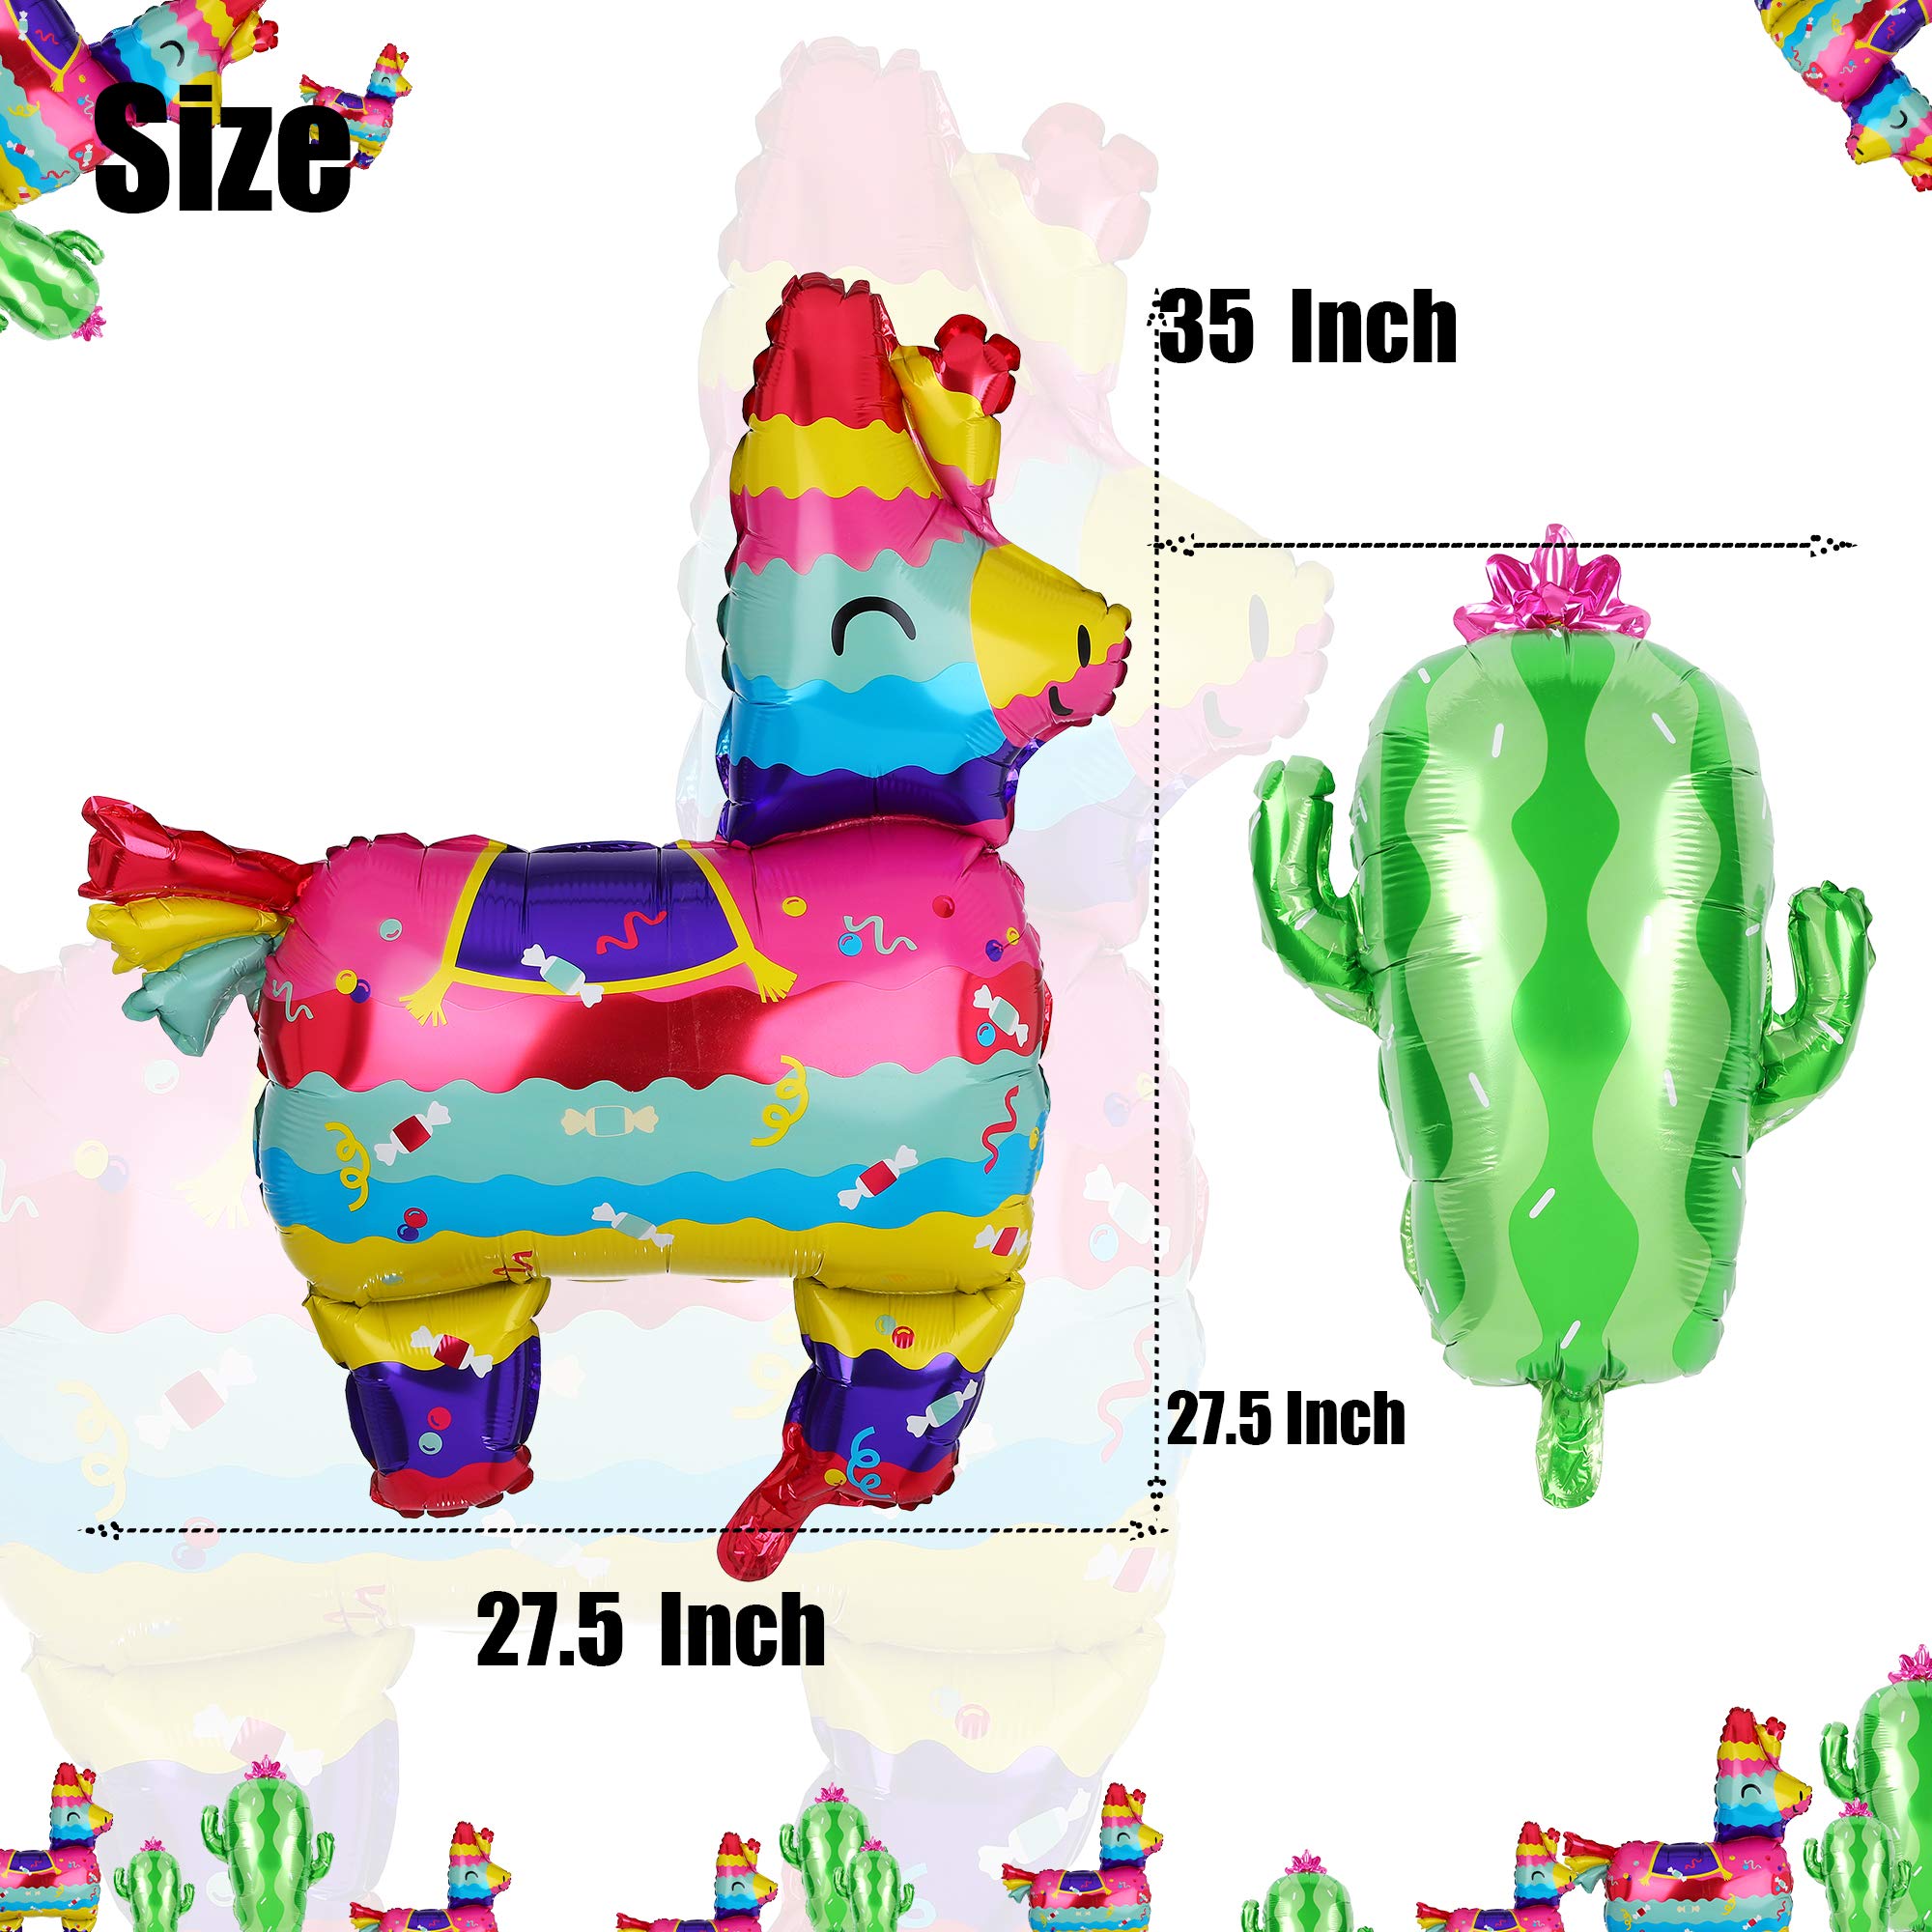 2 Pcs Llama Shaped Jumbo Mylar Foil Balloon and 2 Pcs Cactus Foil Balloons Mexican Fiesta Theme Party Decorations Birthday Baby Shower Decor Supplies